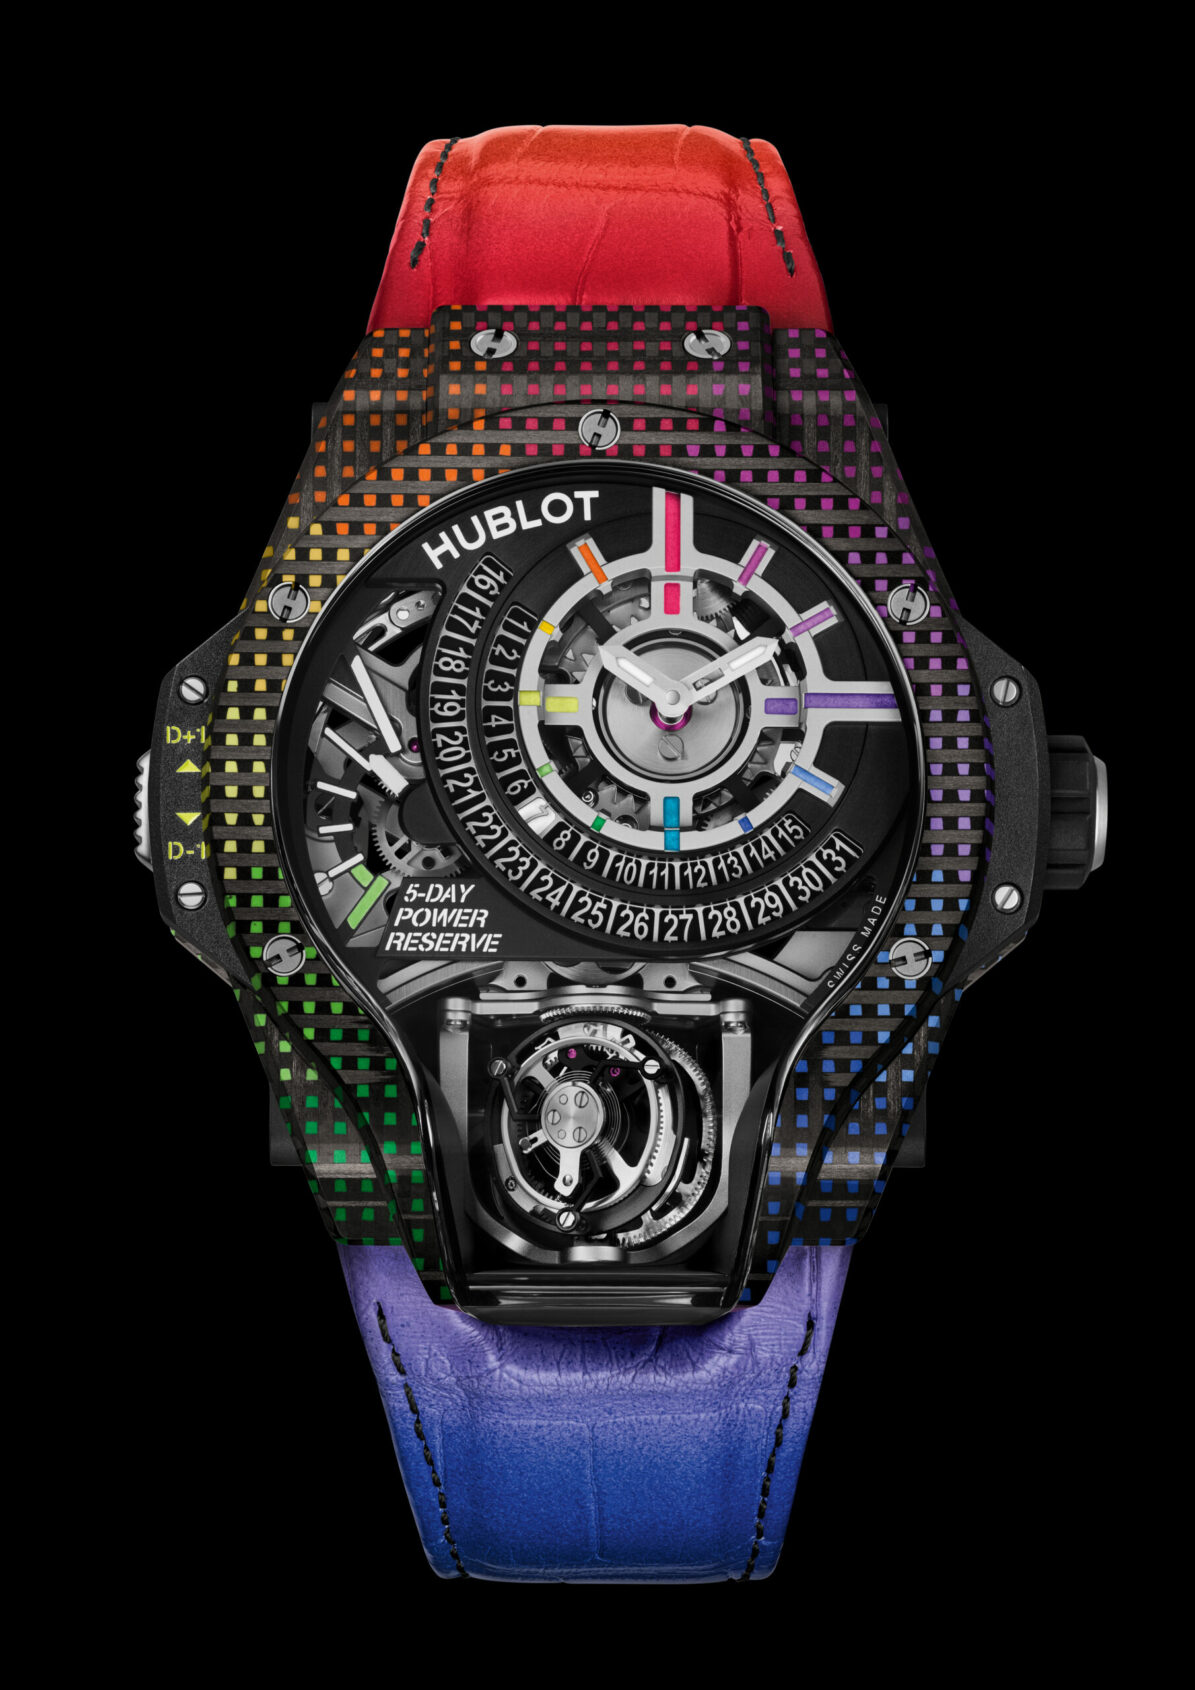 Pushing case design with the Swiss fake Hublot MP-09 Tourbillon Bi-Axis 5-Day Power Reserve